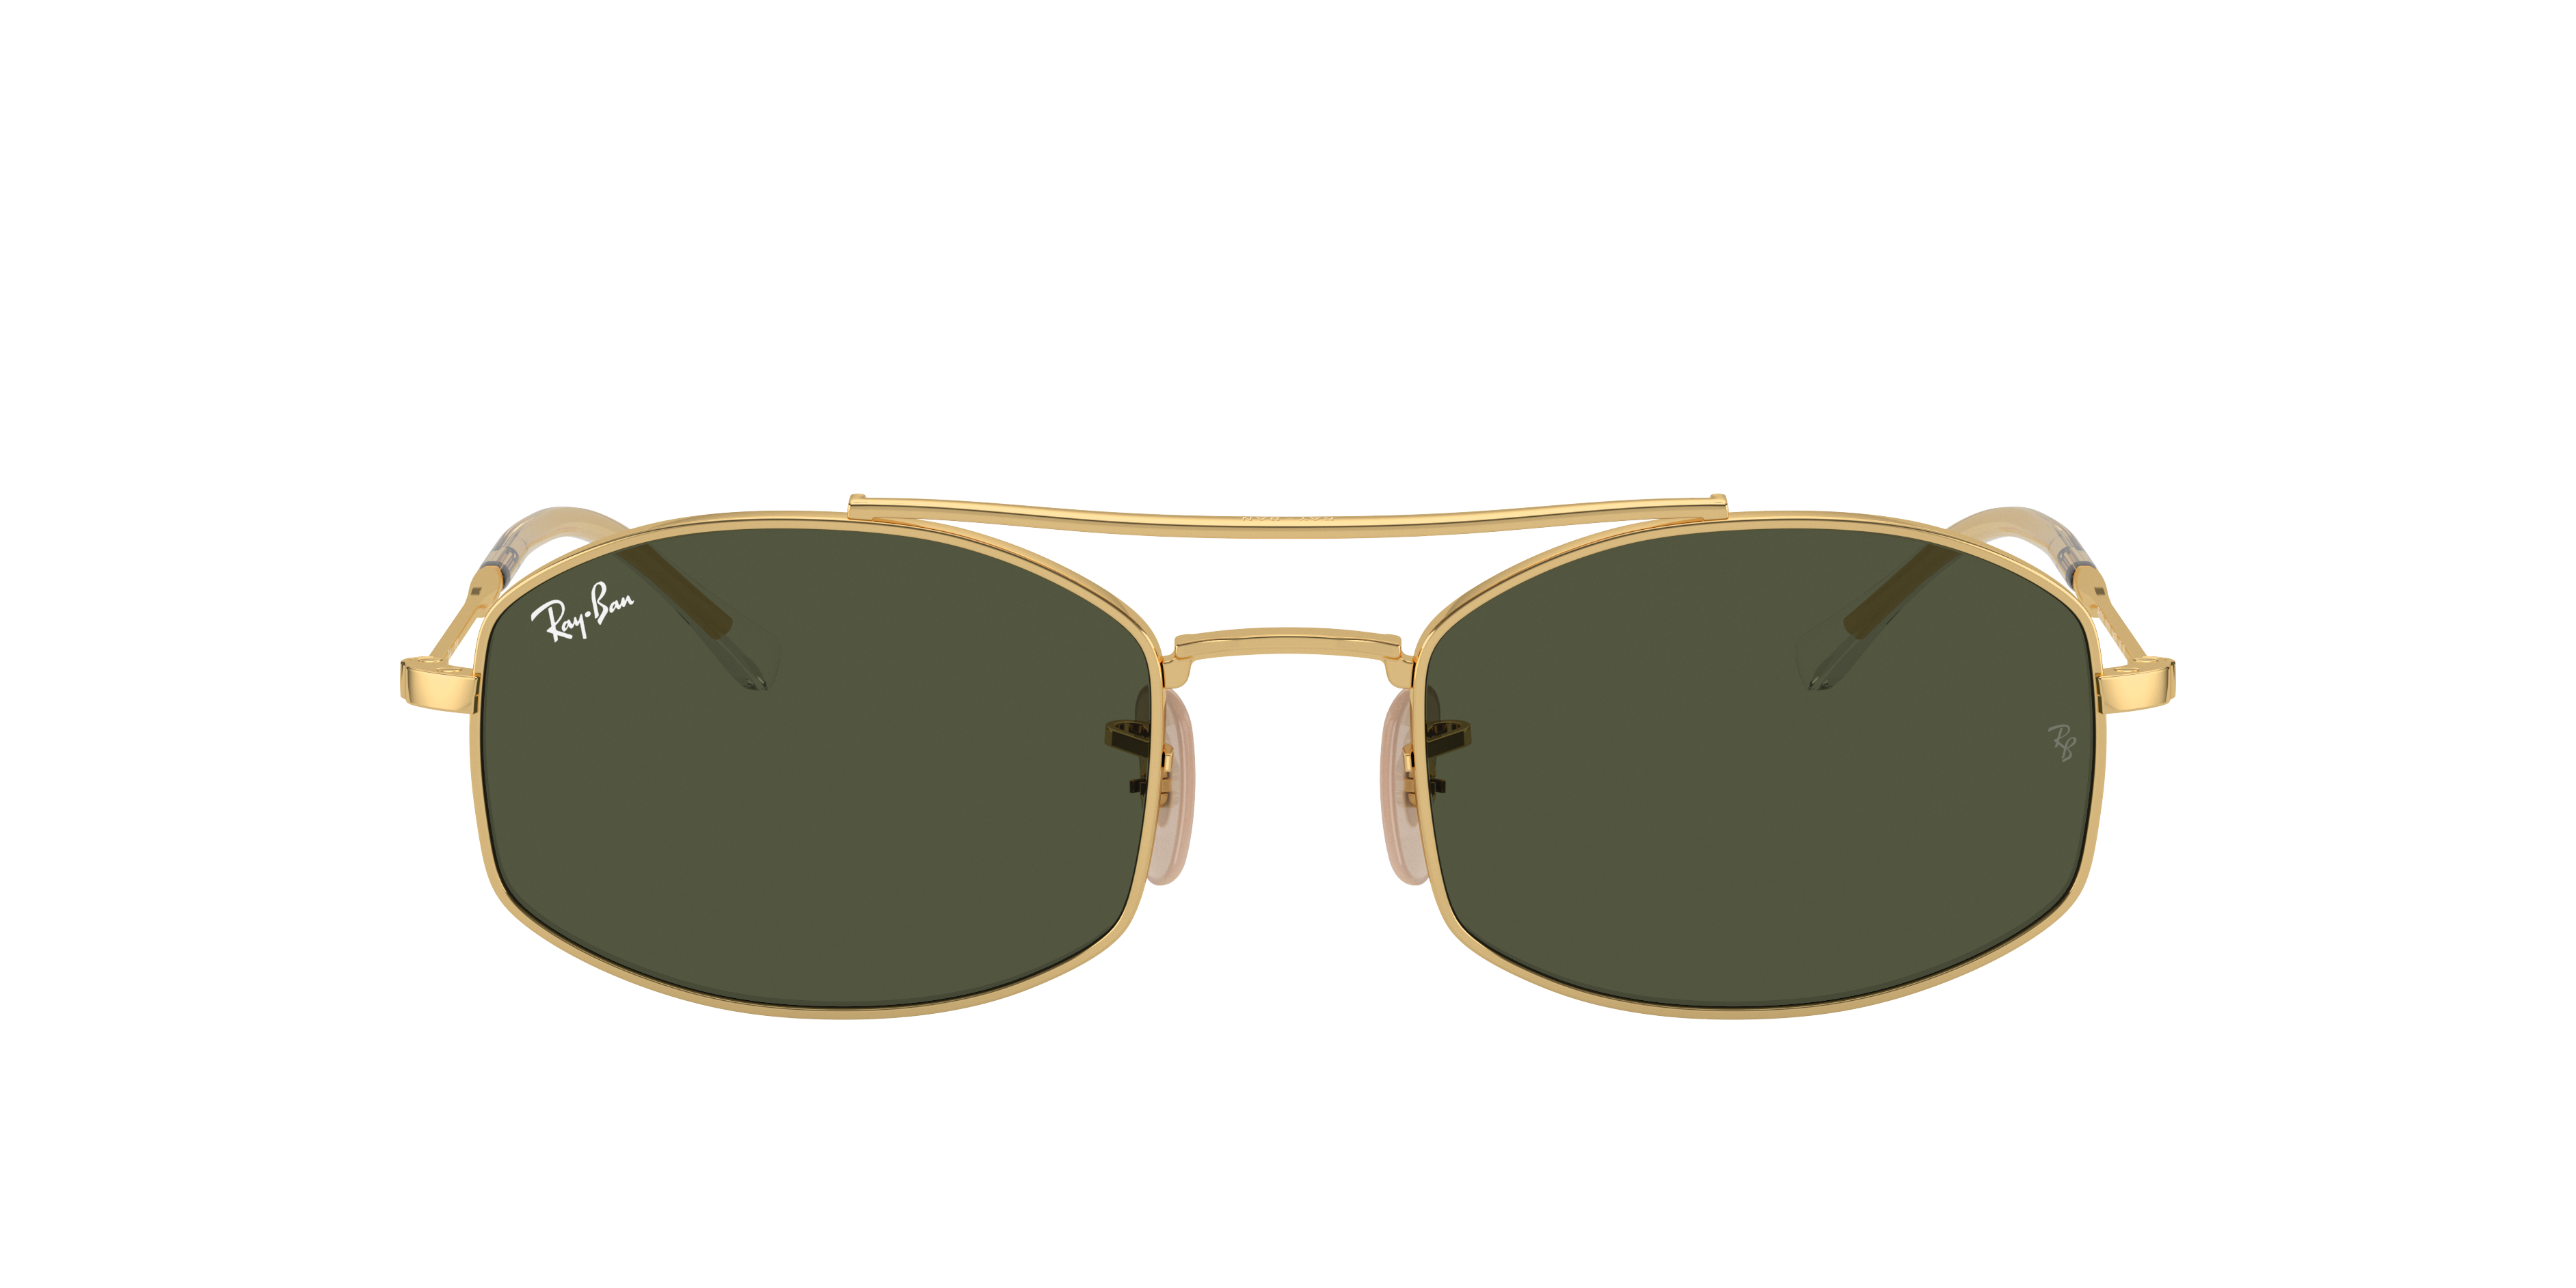 Ray-Ban Meta smart glasses: AI assistant, live streaming capability |  Details - Hindustan Times